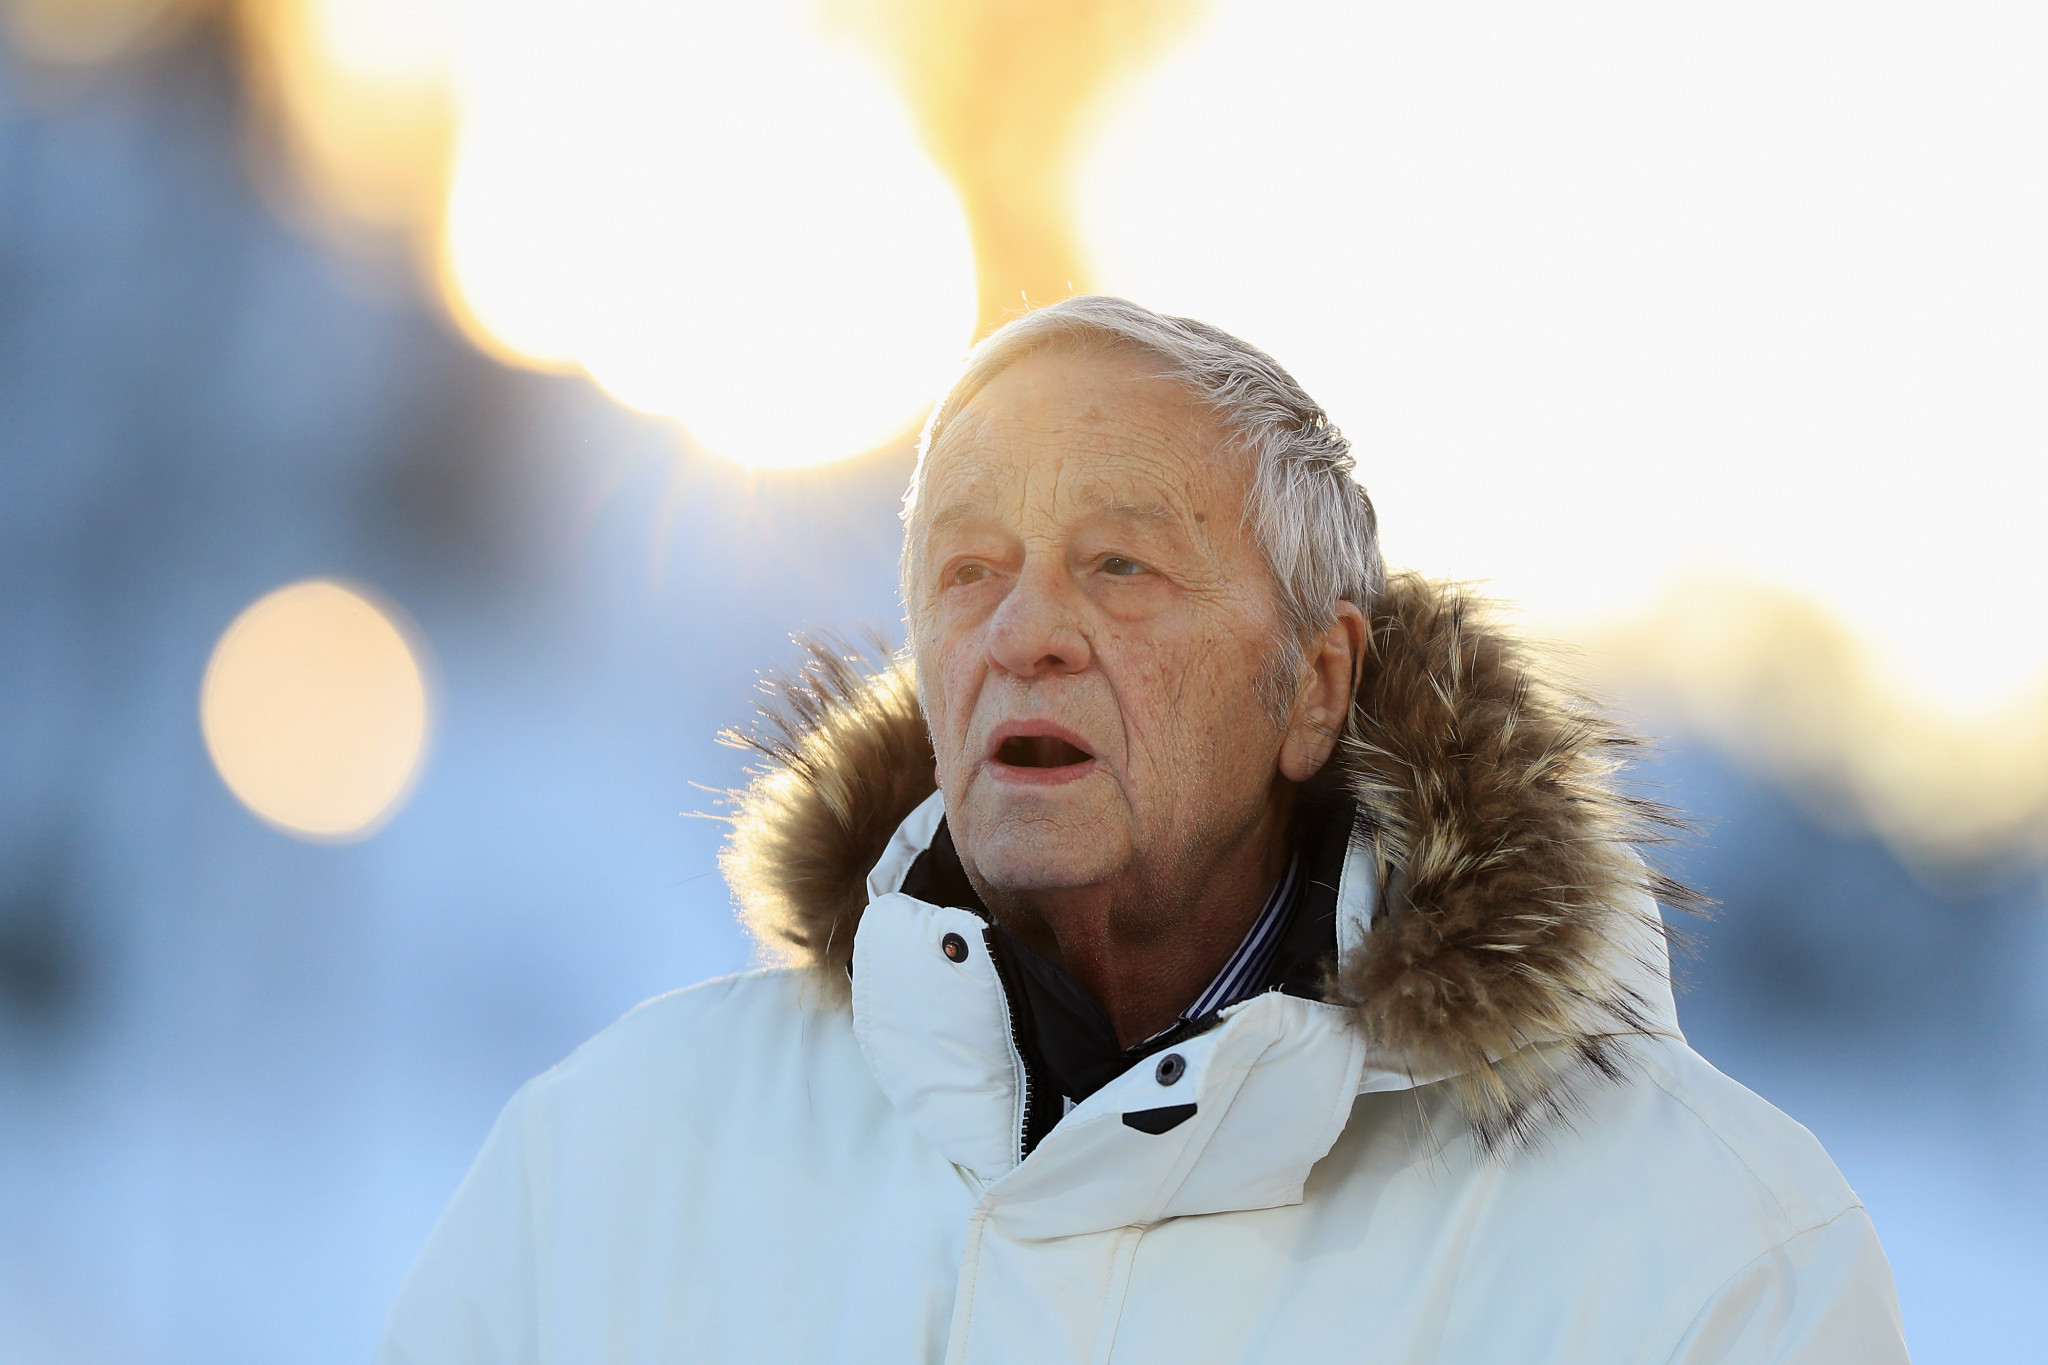 IOC Executive Board member Gian-Franco Kasper has admitted he does not expect many spectators to attend events across Pyeongchang 2018 ©Getty Images